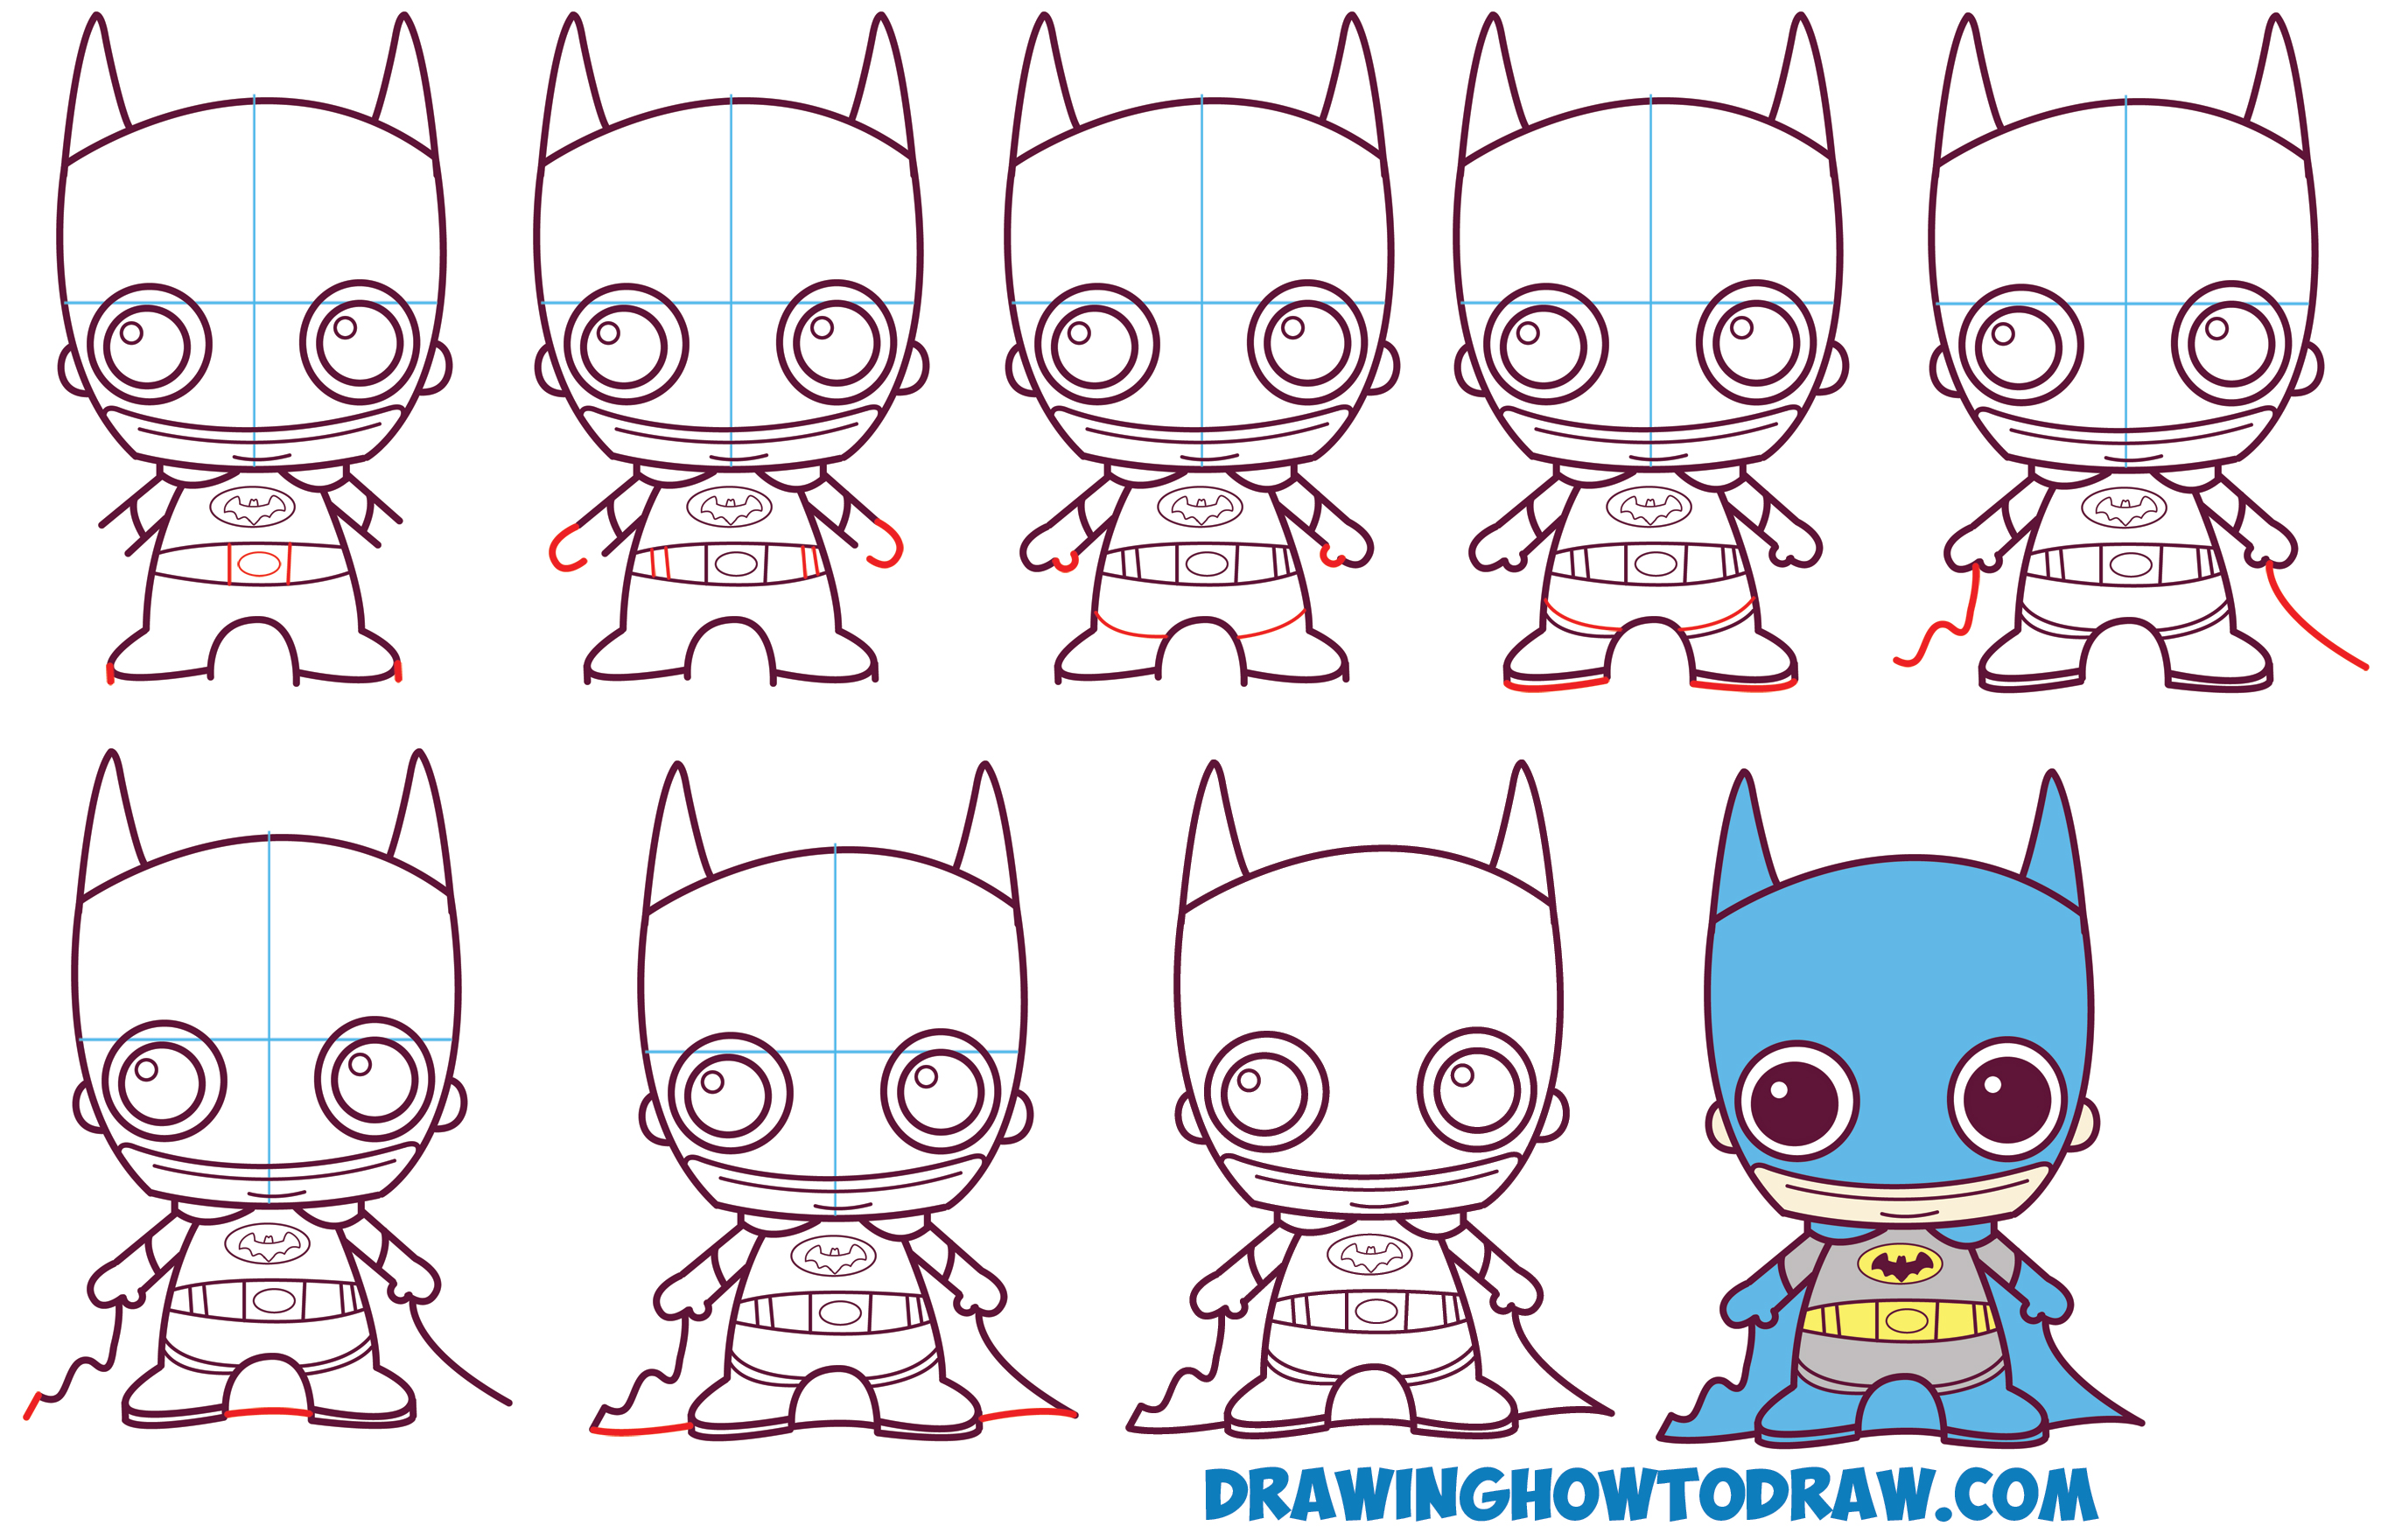 How to Draw Cute Chibi Batman from DC Comics in Easy Step by Step